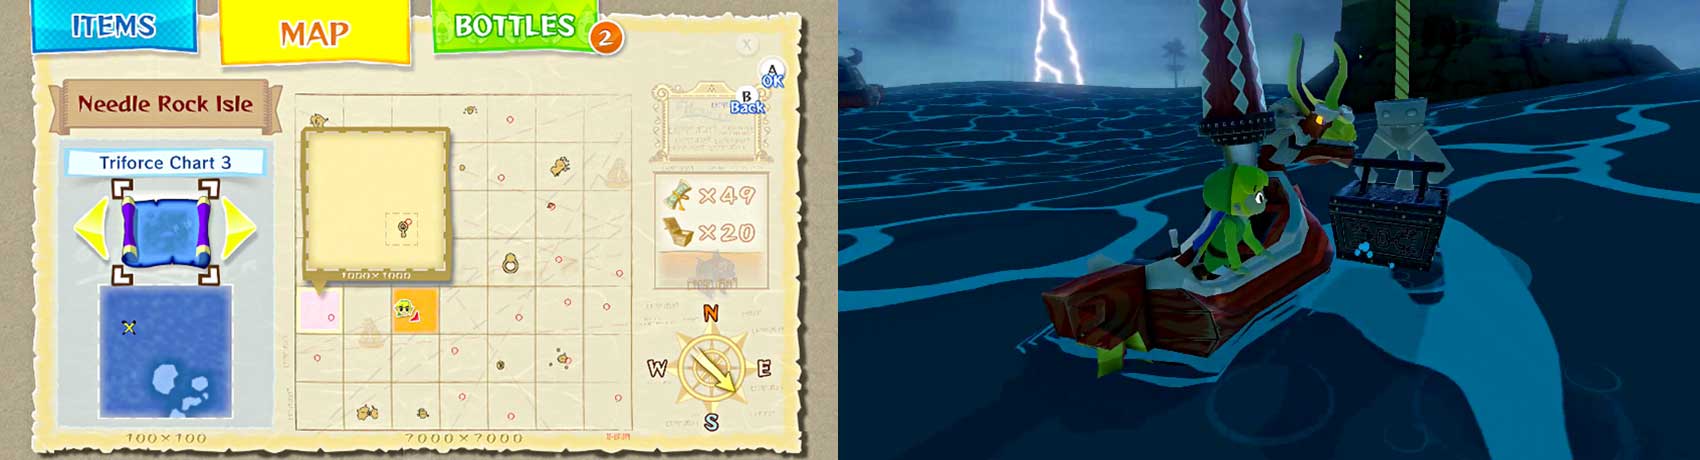 Now, you will using these charts like any other charts. When you sail to the proper spot, use the map to find the treasure marked with the X and use the Grappling Hook to get the treasure.